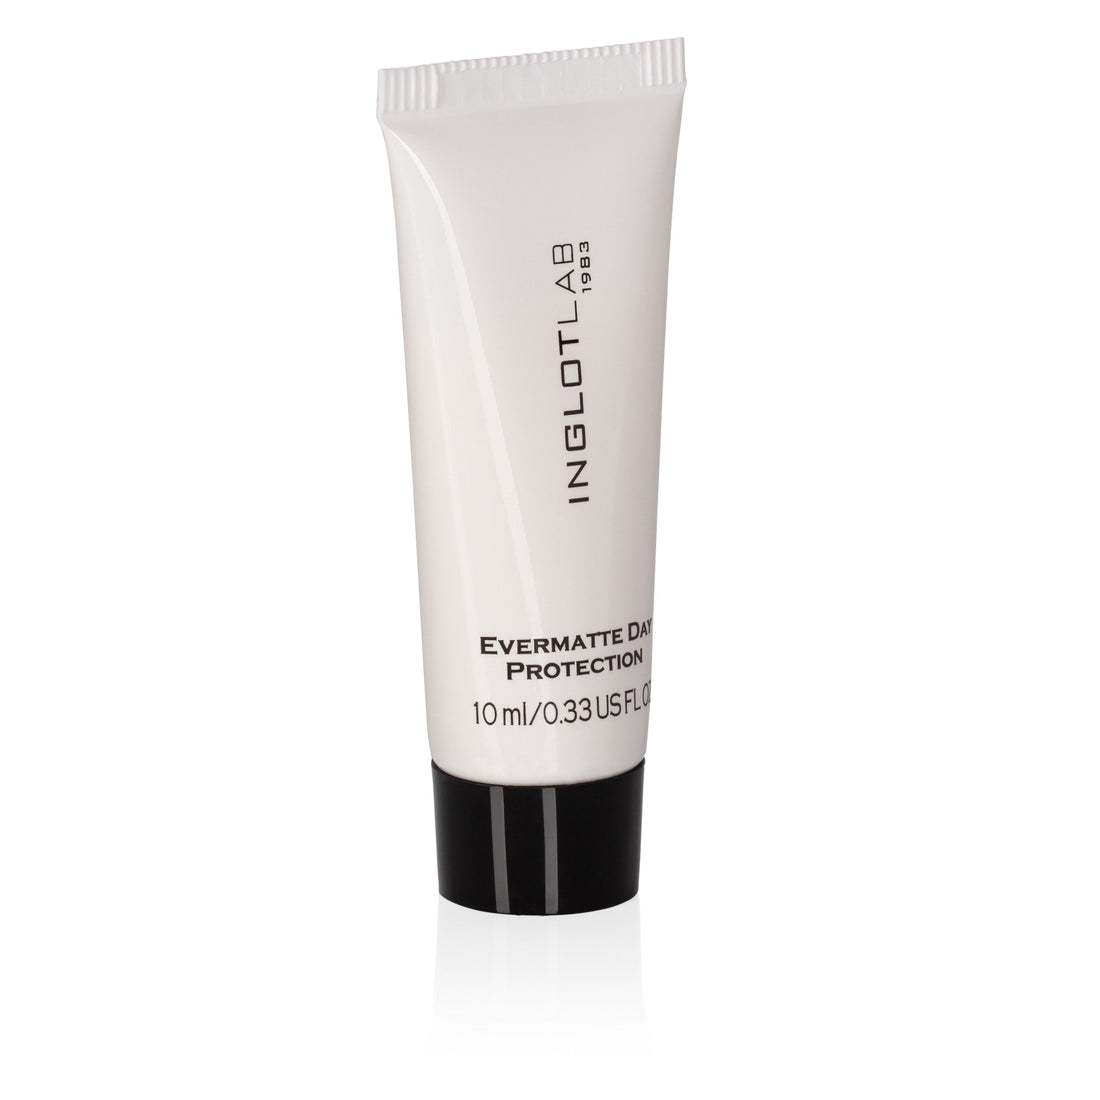 LAB Evermatte Day Face Cream Travel Size - Inglot Cosmetics